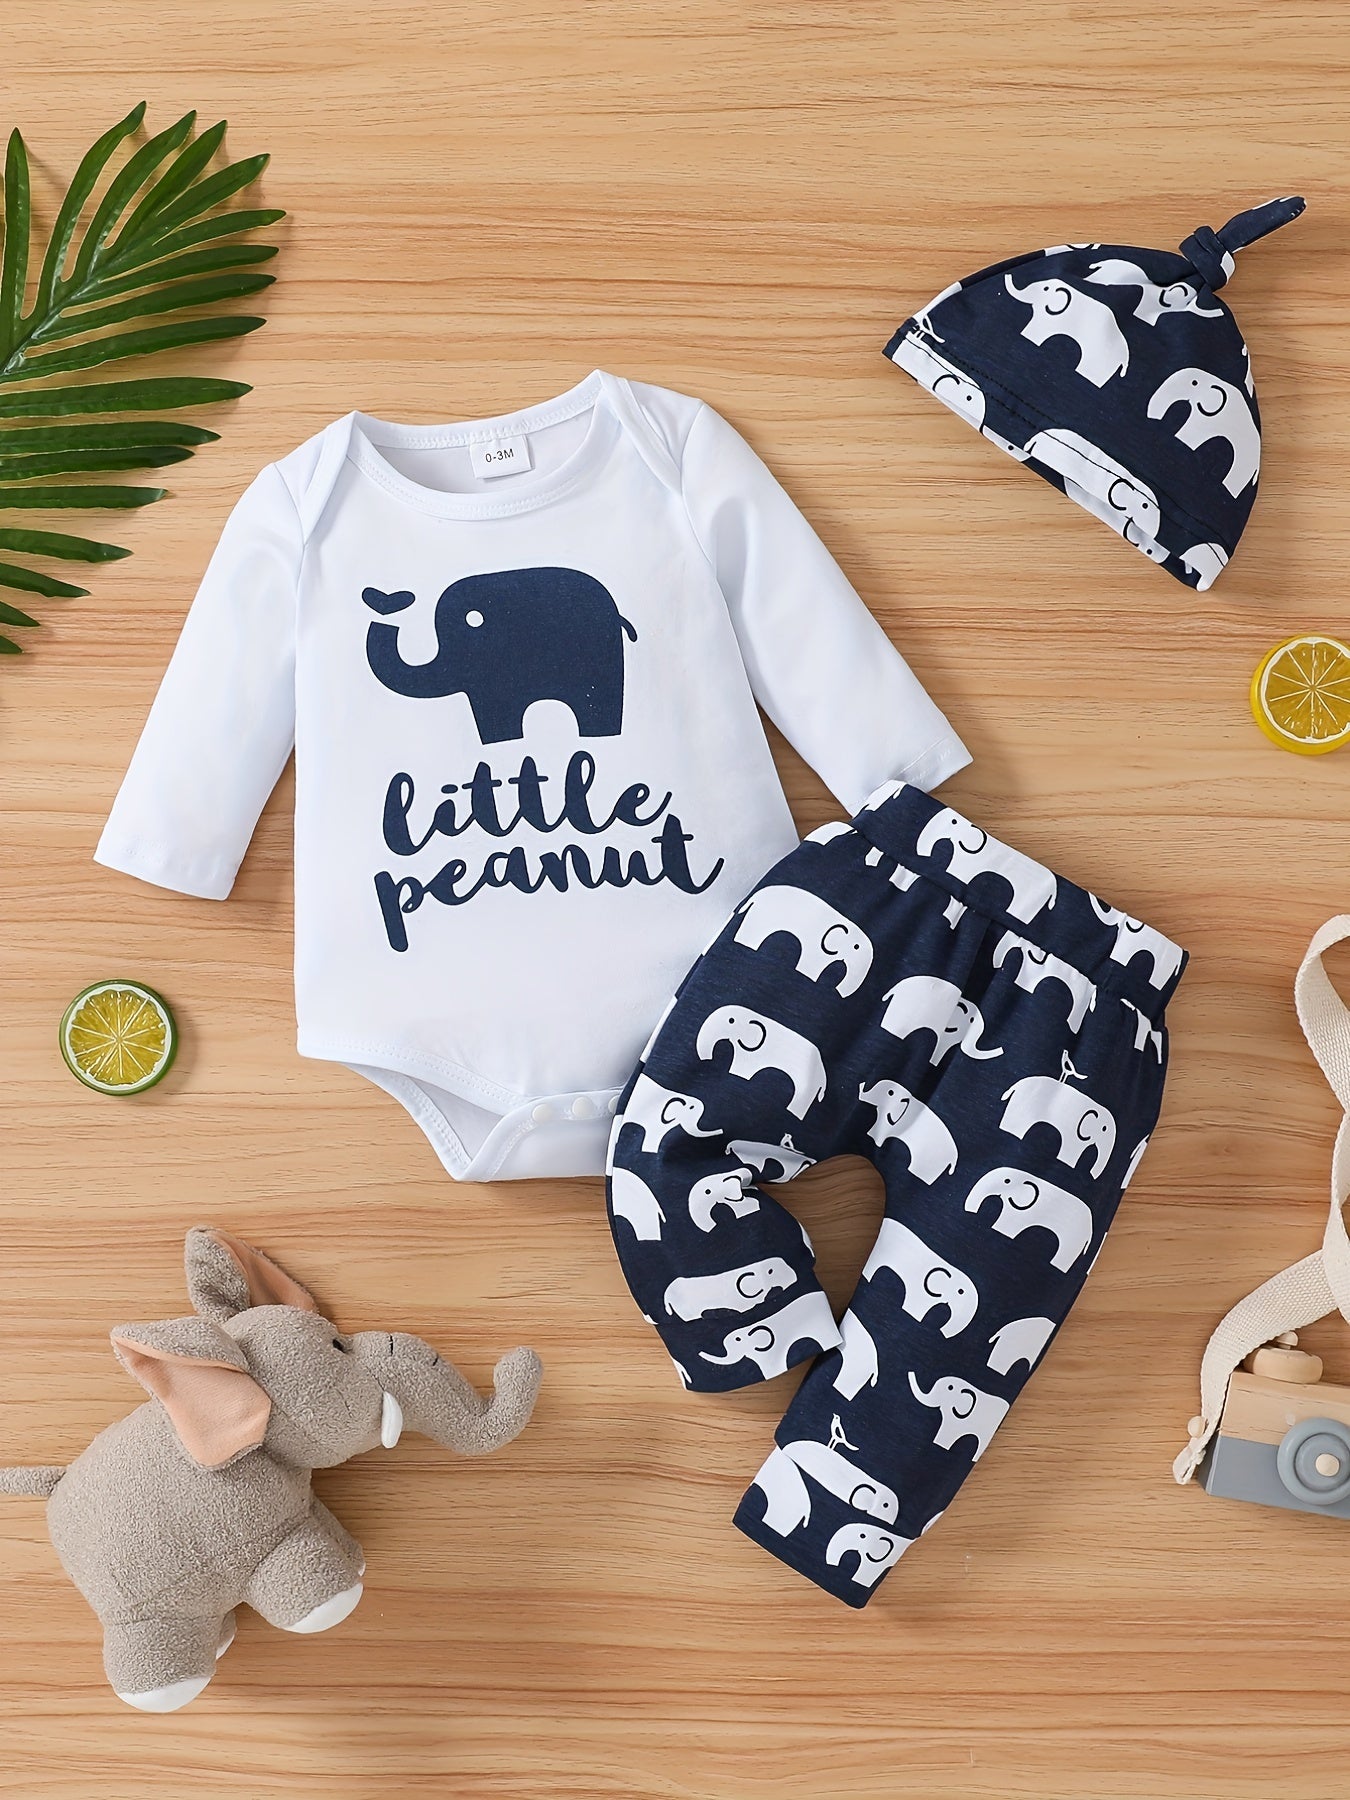 Baby Boys Cotton Bodysuit + Matching Pants + Hat With Elephant Print, Long Sleeve Romper Onesie Set Baby Clothes